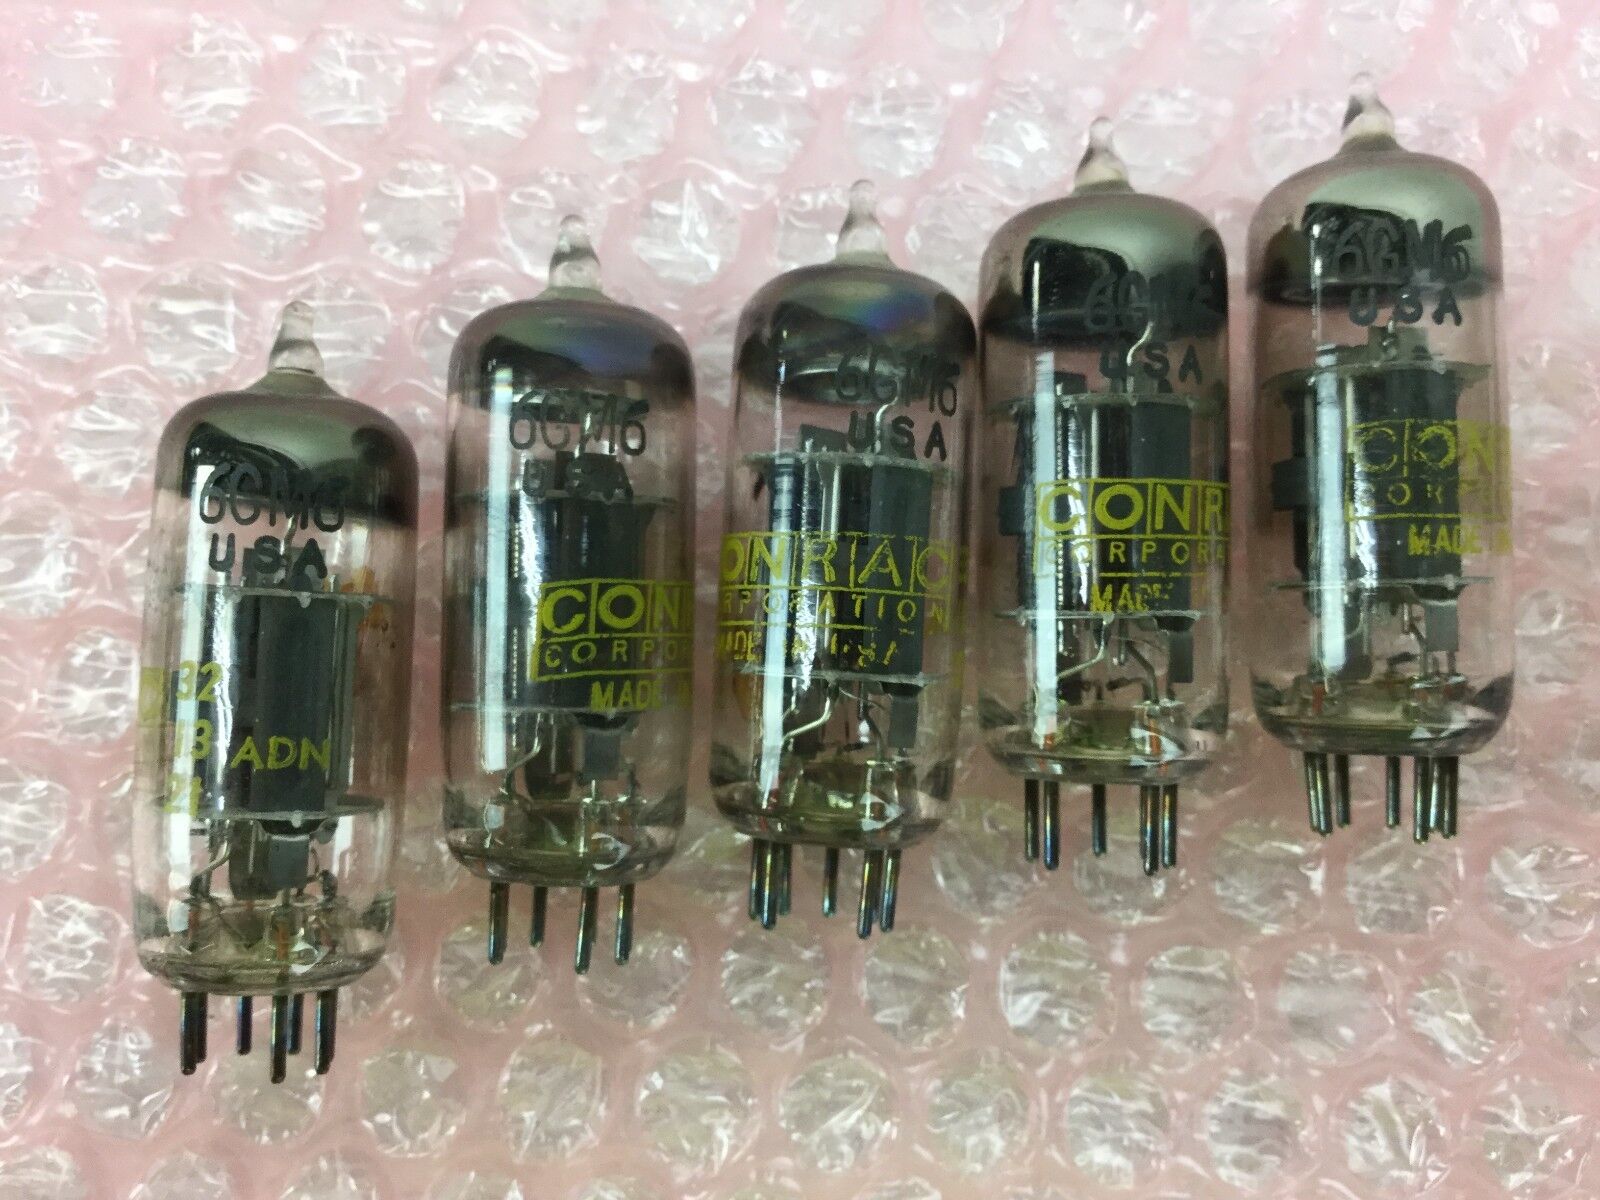 CONRAC 6GM6 Tube, Tested and GOOD, Lot of 5